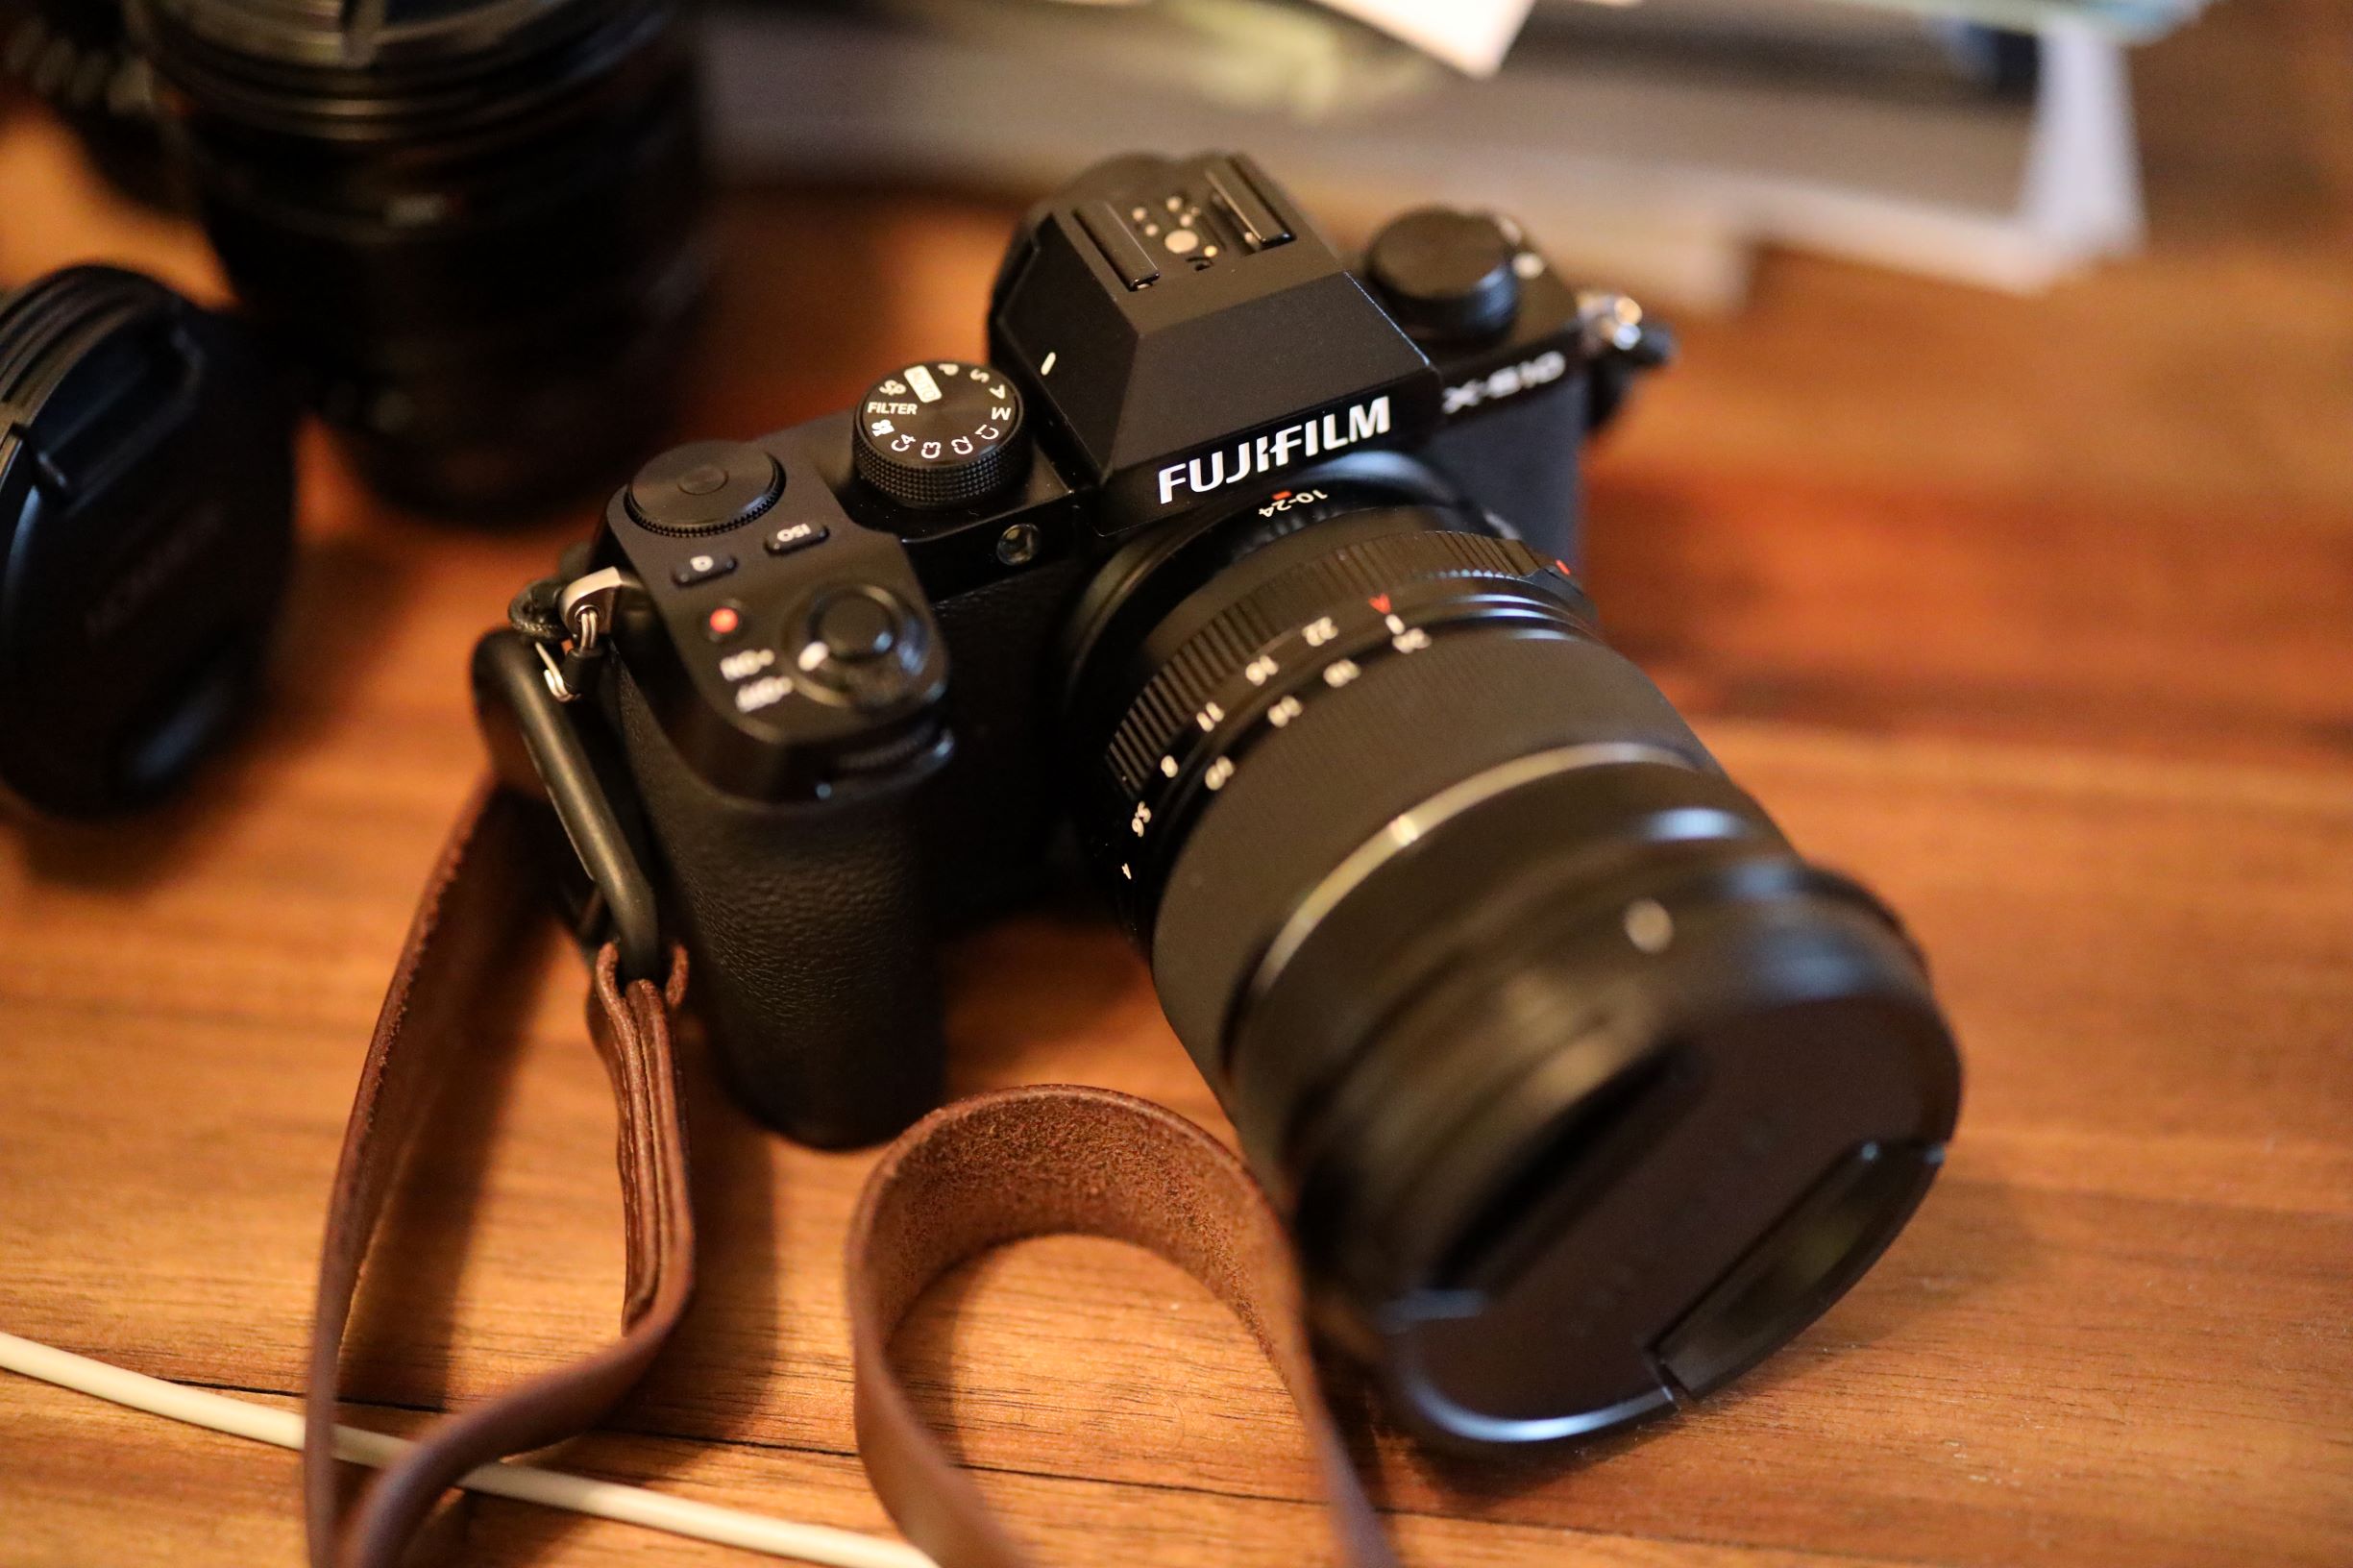 The Fujifilm X S10 Is A Compact Pro Camera Loaded With Super Cool